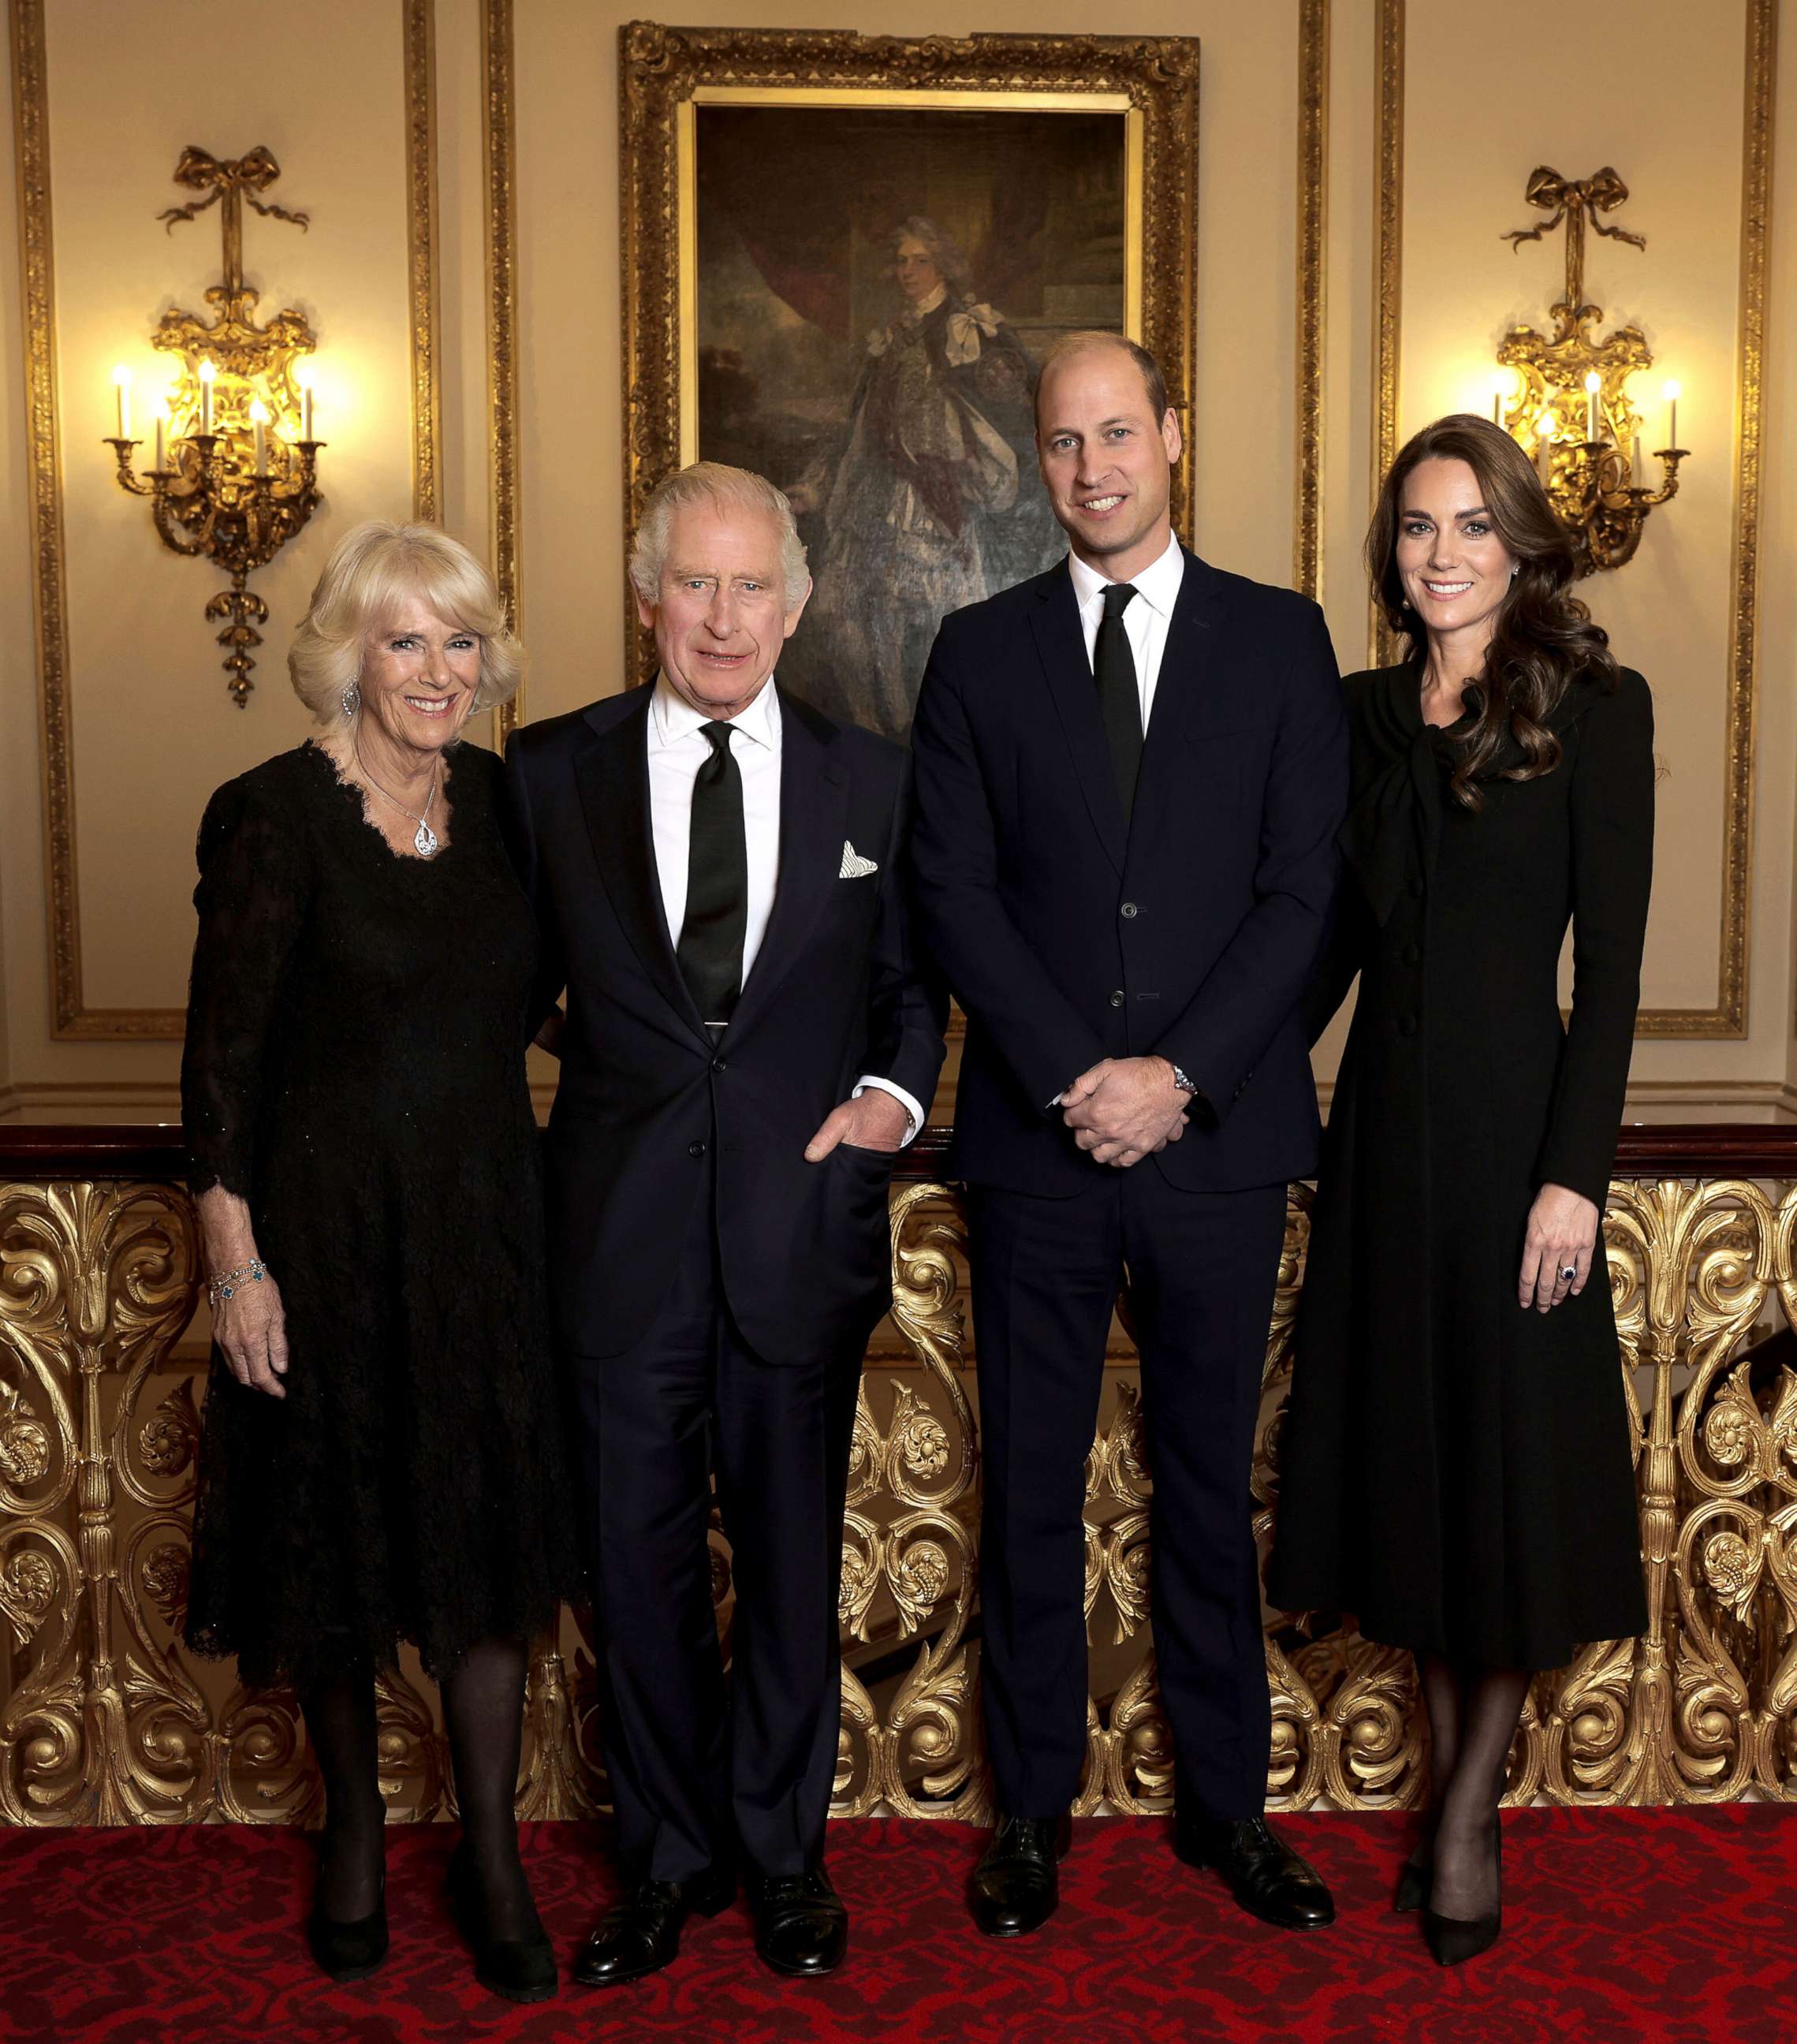 PHOTO: Camilla, the Queen Consort, Britain's King Charles III, Prince William and Kate, Princess of Wales, pose ahead of the reception for Heads of State and Official Overseas Guests at Buckingham Palace, London, Sept. 18, 2022.